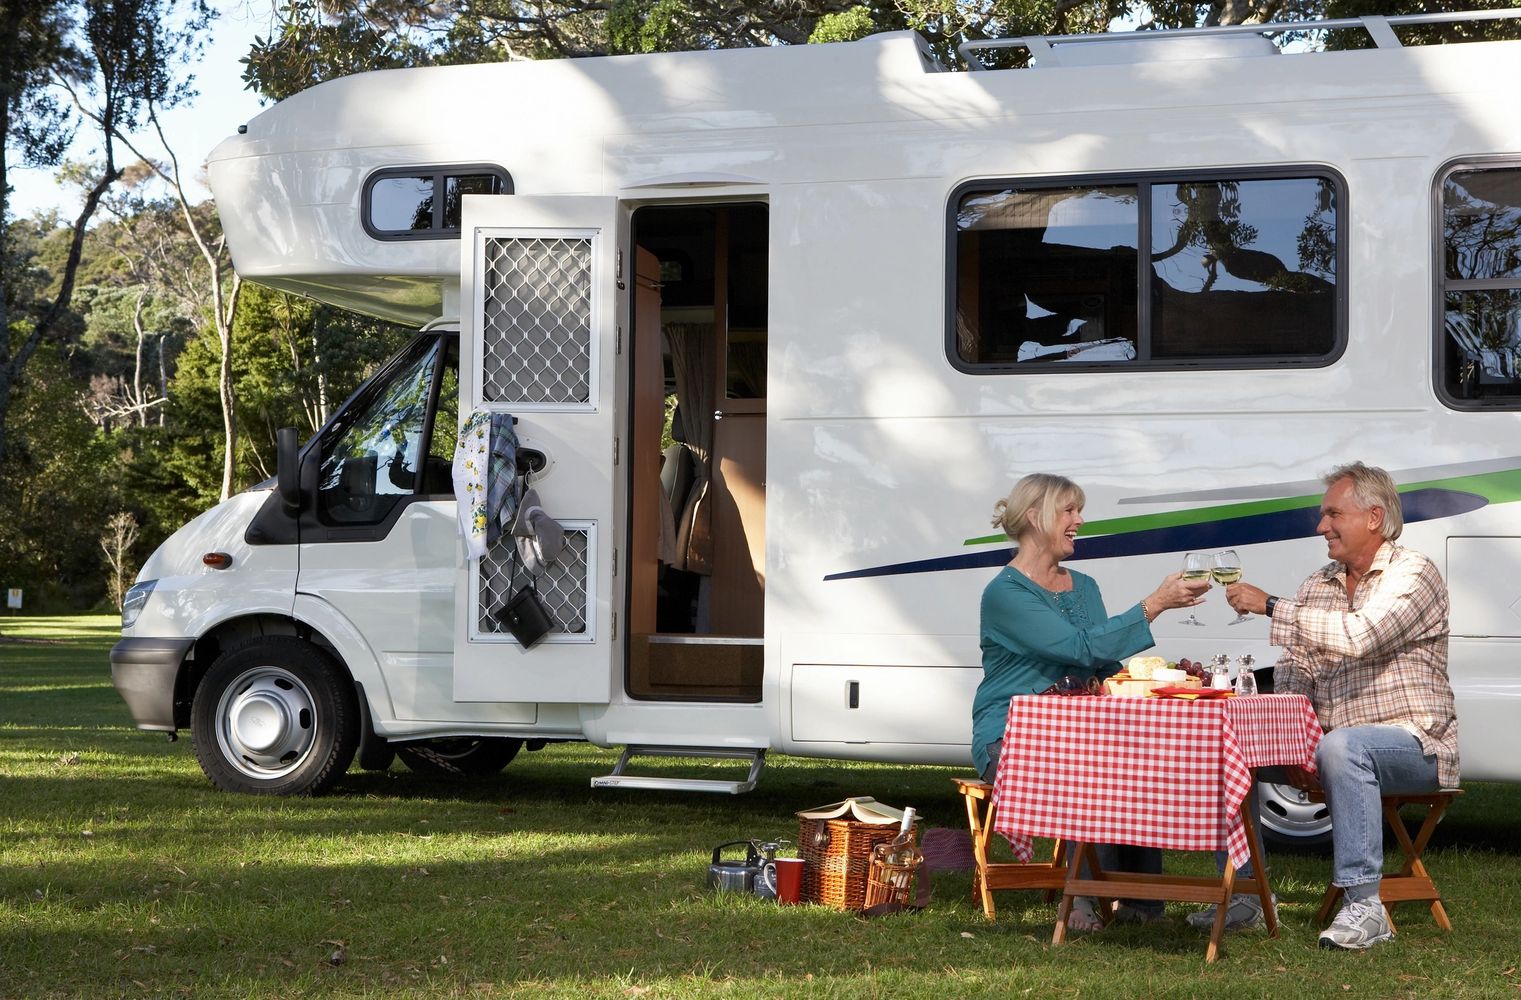 People enjoying their time camping with their RV.